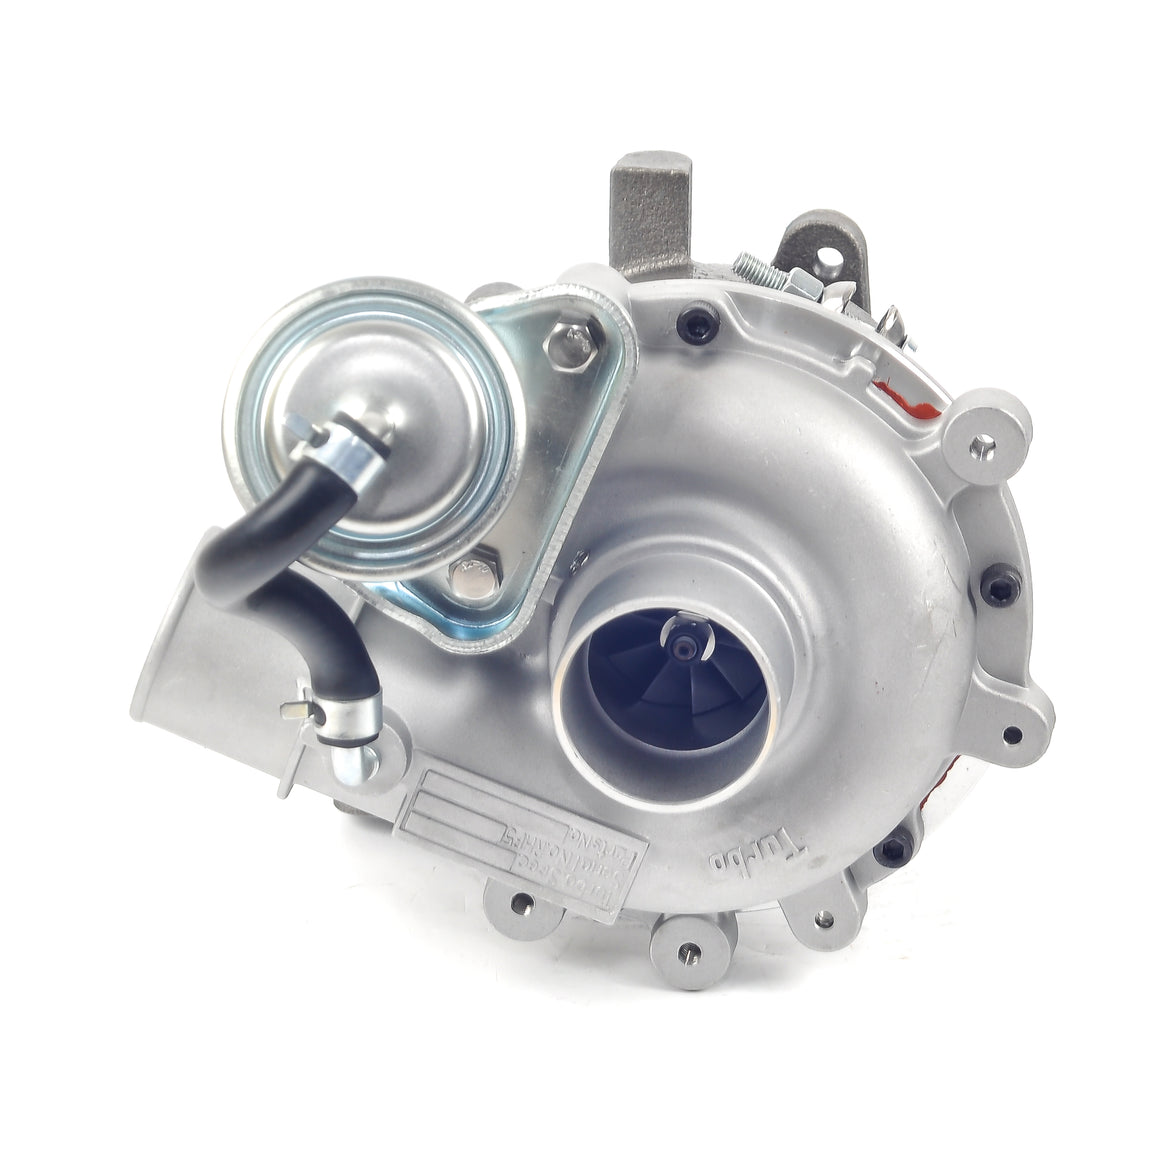 CCT Turbocharger To Suit Mazda Bravo B2500 / Ford Courier 2.5l Turbo Charger WL84 WL85